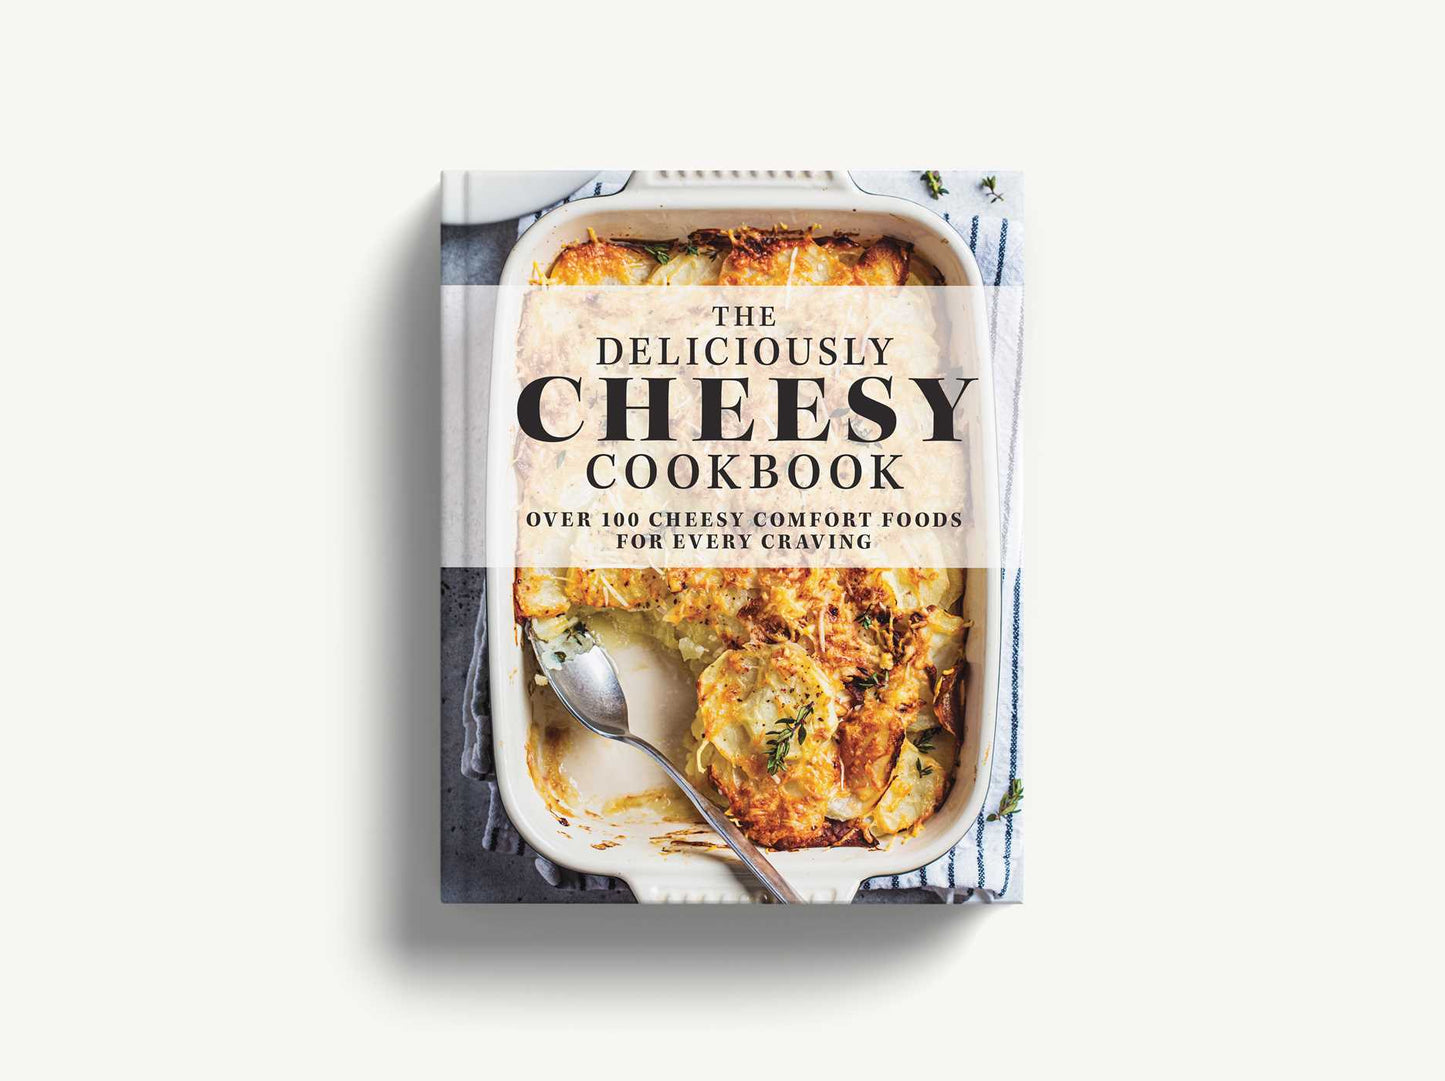 The Deliciously Cheesy Cookbook: Over 100 Cheesy Comfort Foods for Every Craving